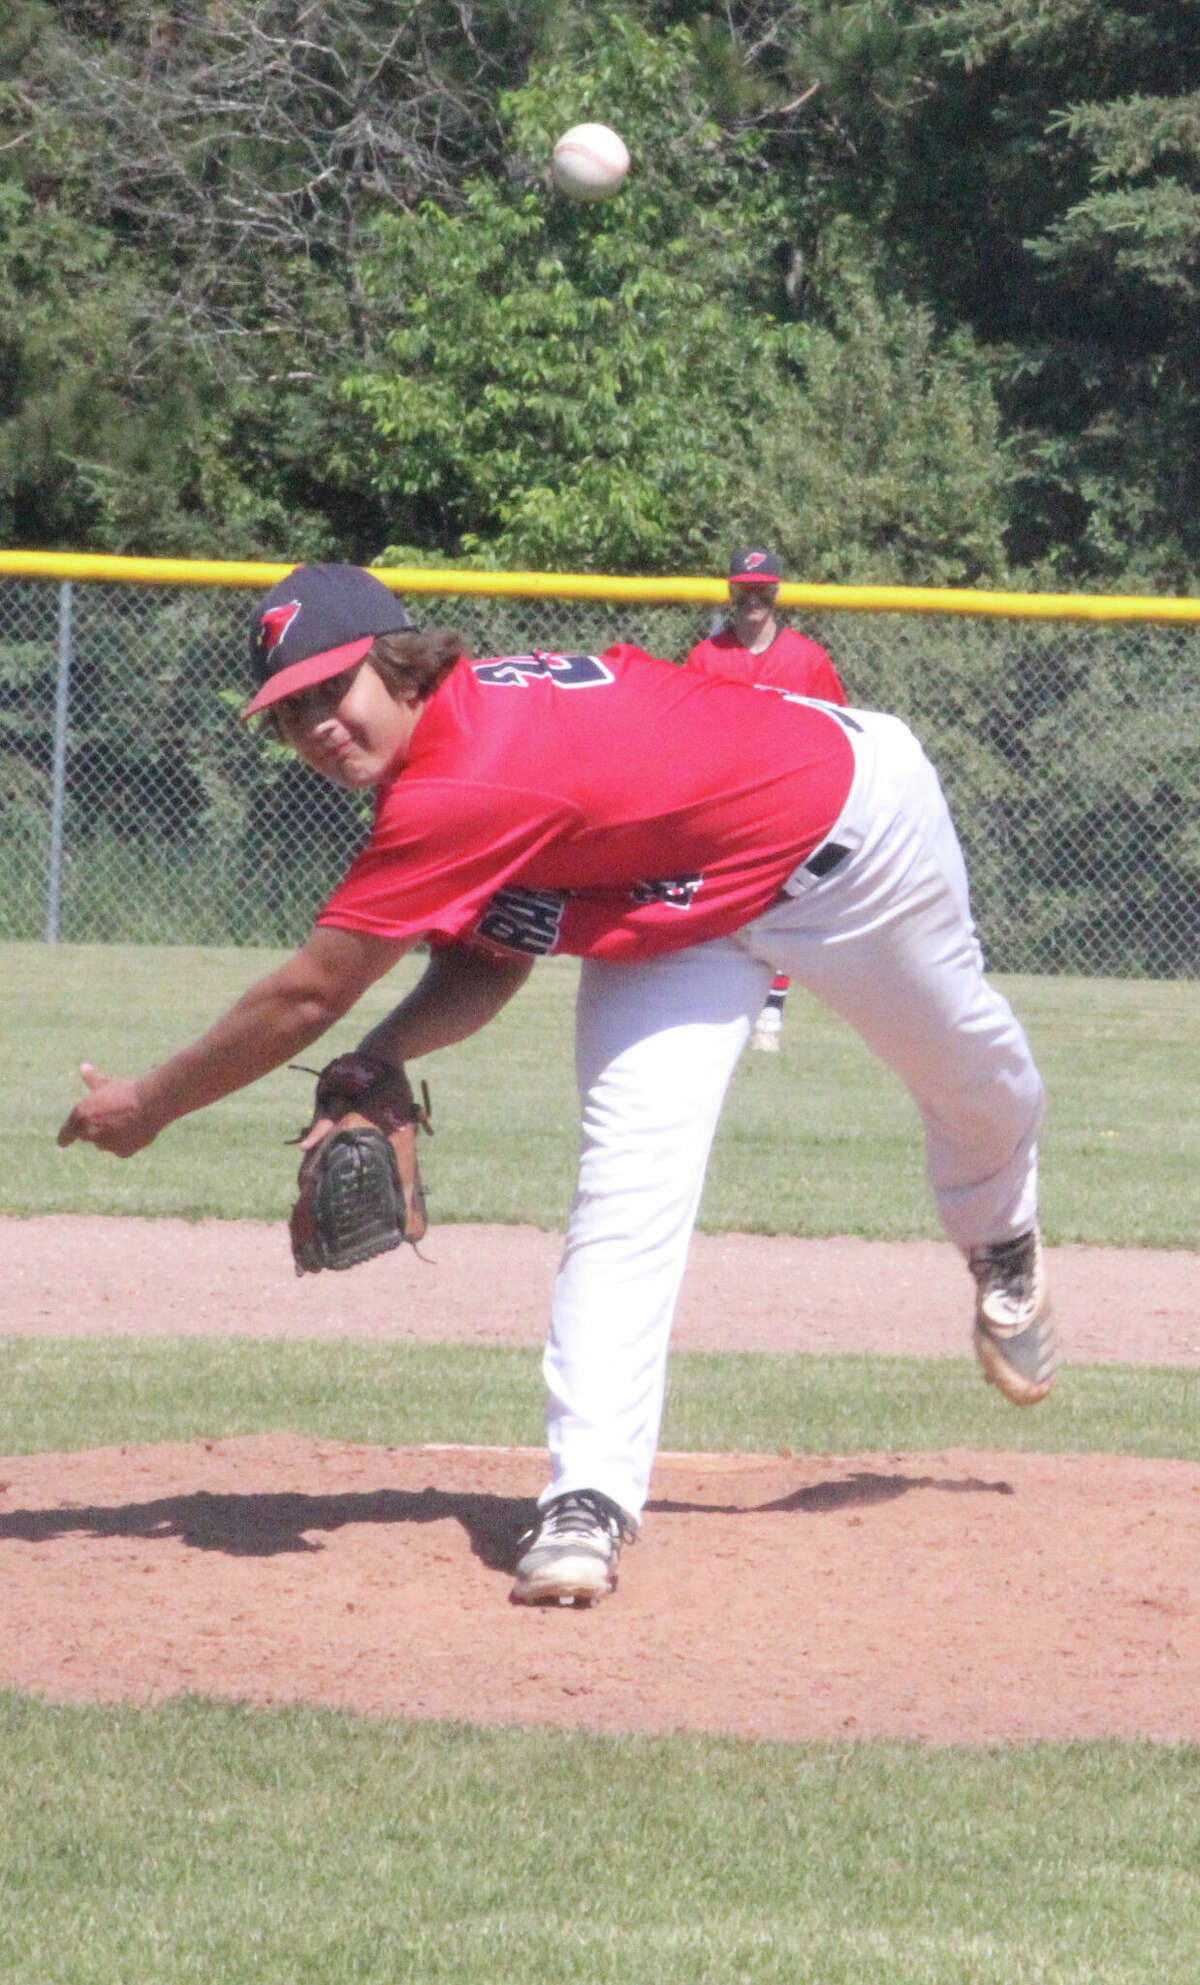 Sawyer Meeuwes fires a pitch during the 2021 Big Rapids High School season.